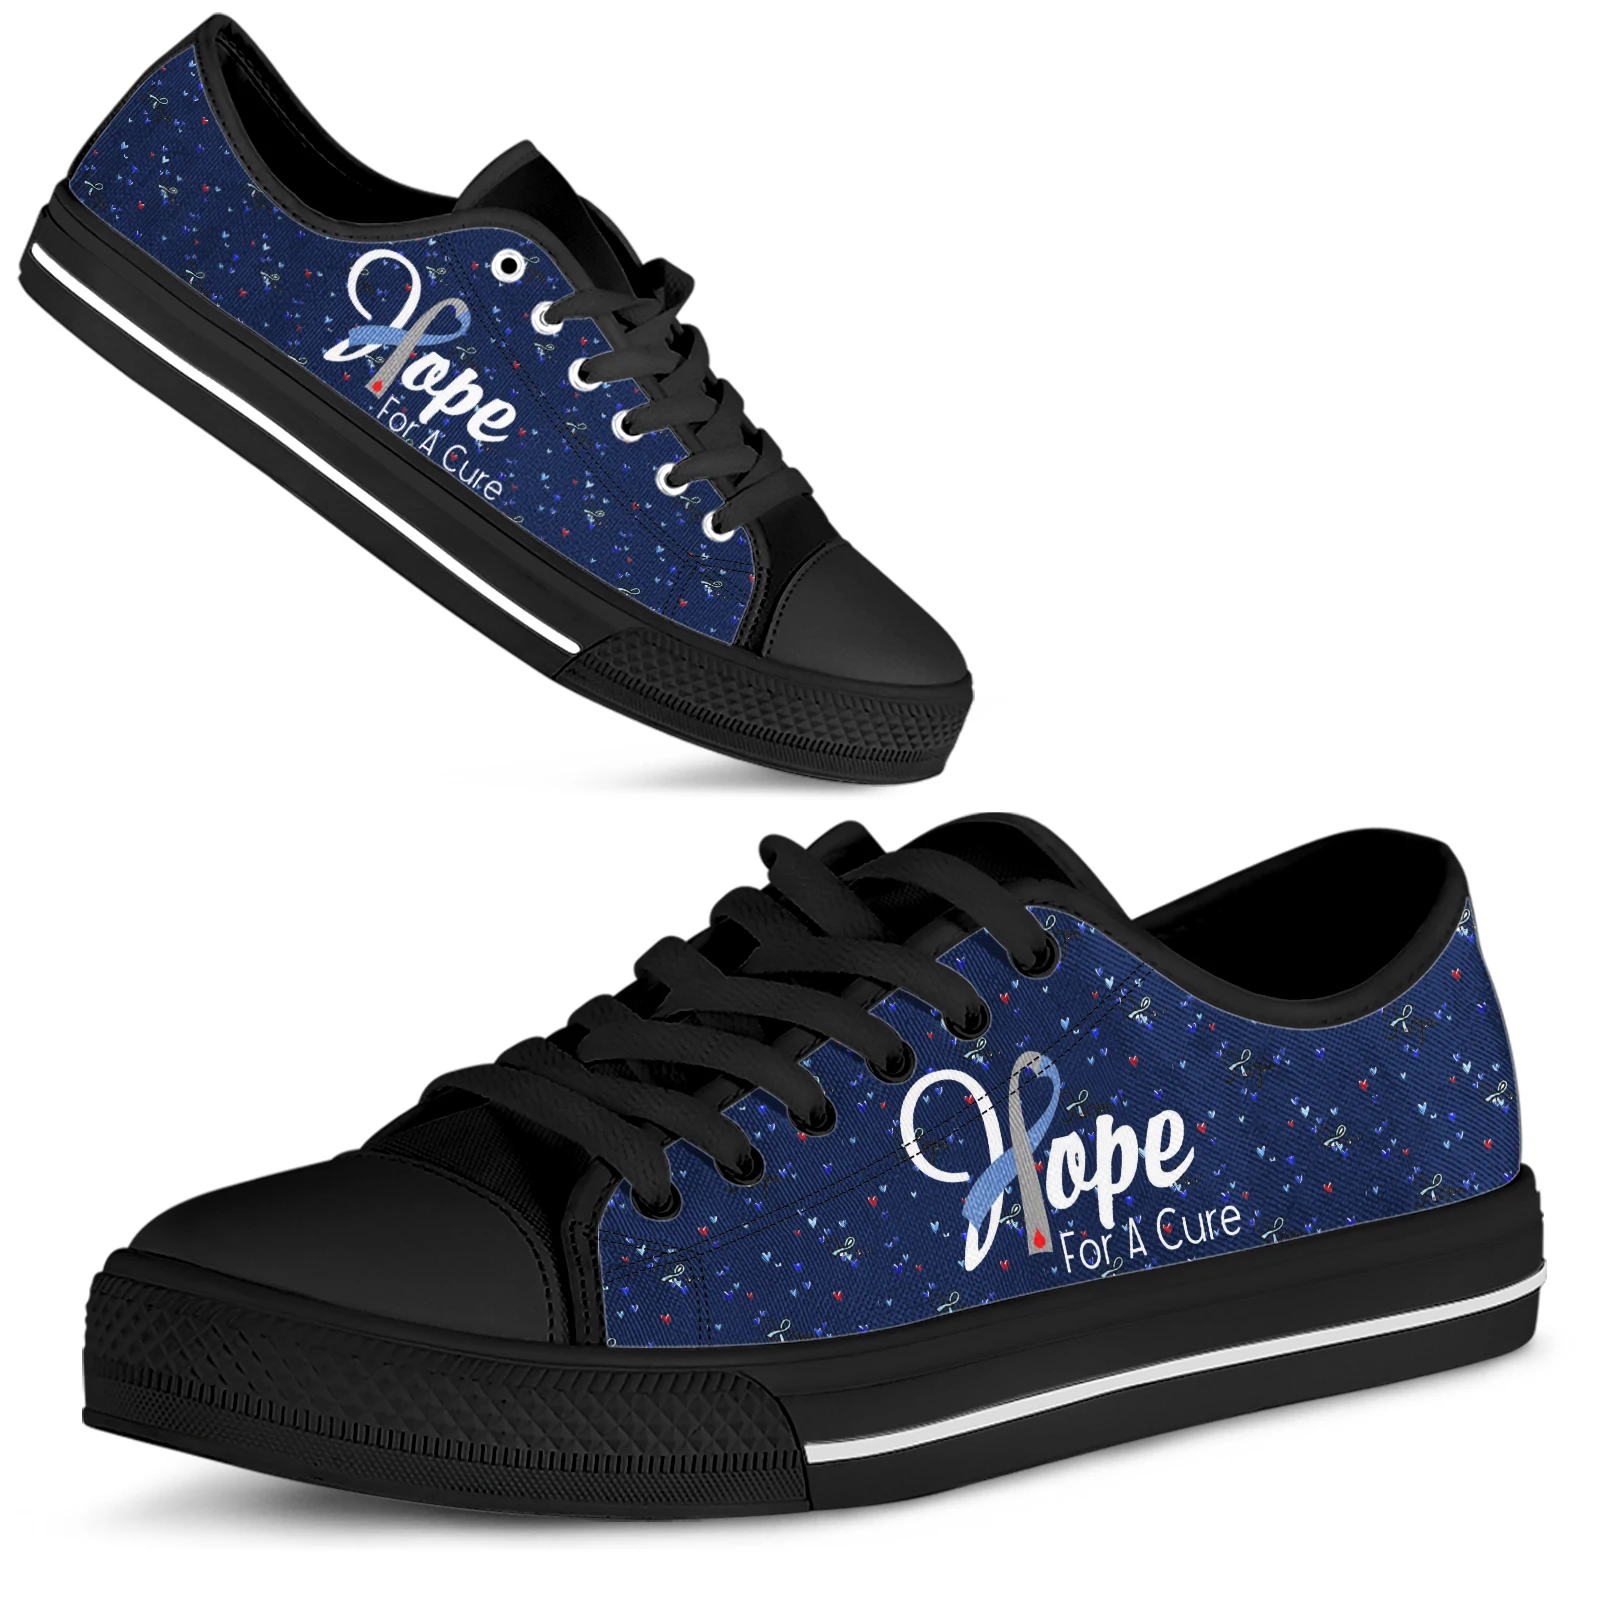 ELVISWORDS Blue & Gray Ribbon Design Canvas Shoes Diabetes Sneakers Hope Print Casual Shoes Lightweight Lace-up Flats Zapatos